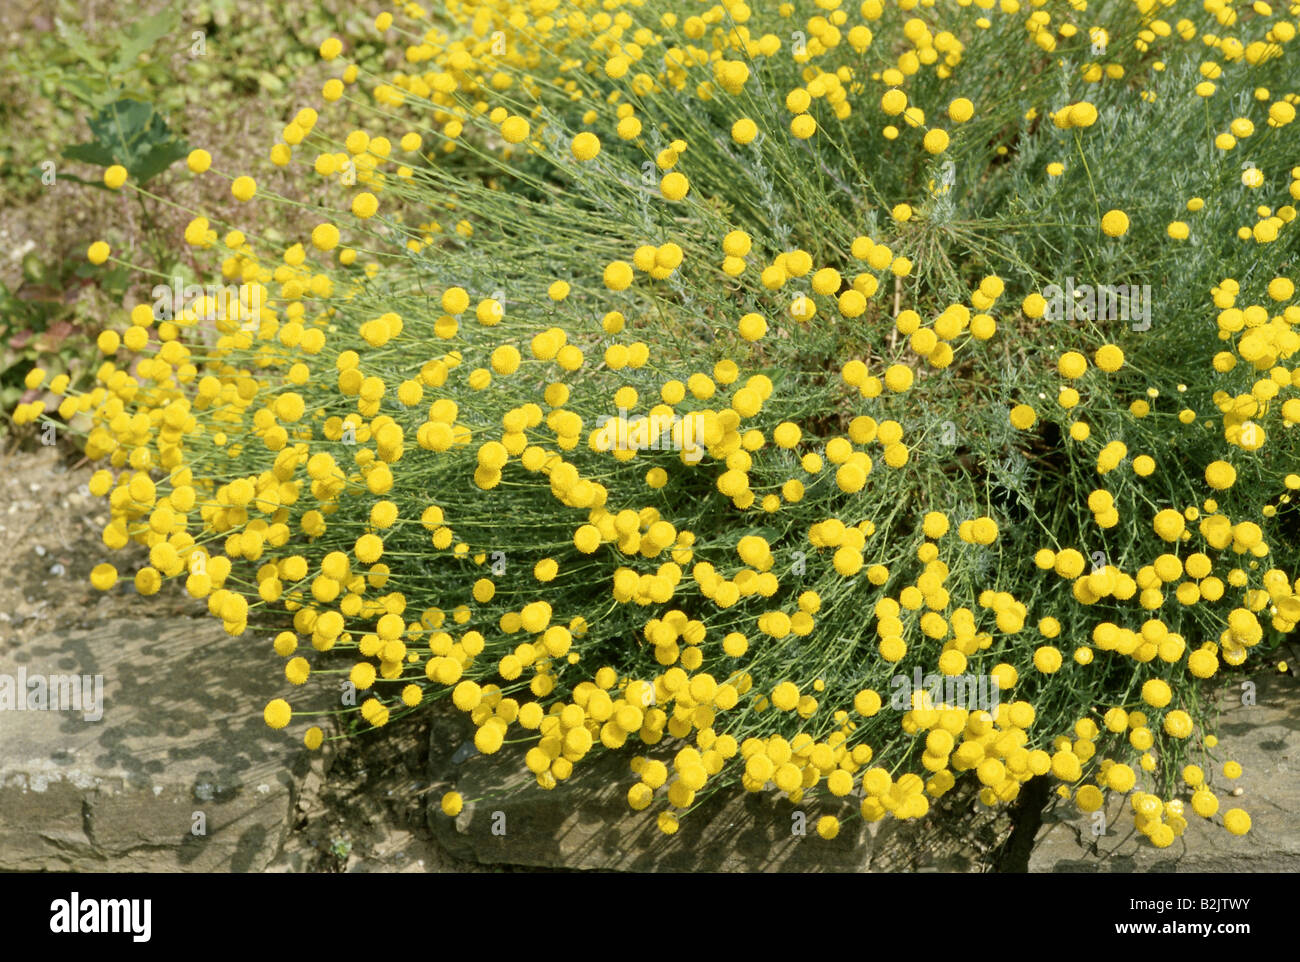 botany, Gray Santolina (Santolina chamaecyparissus), yellow flowering plants, Additional-Rights-Clearance-Info-Not-Available Stock Photo